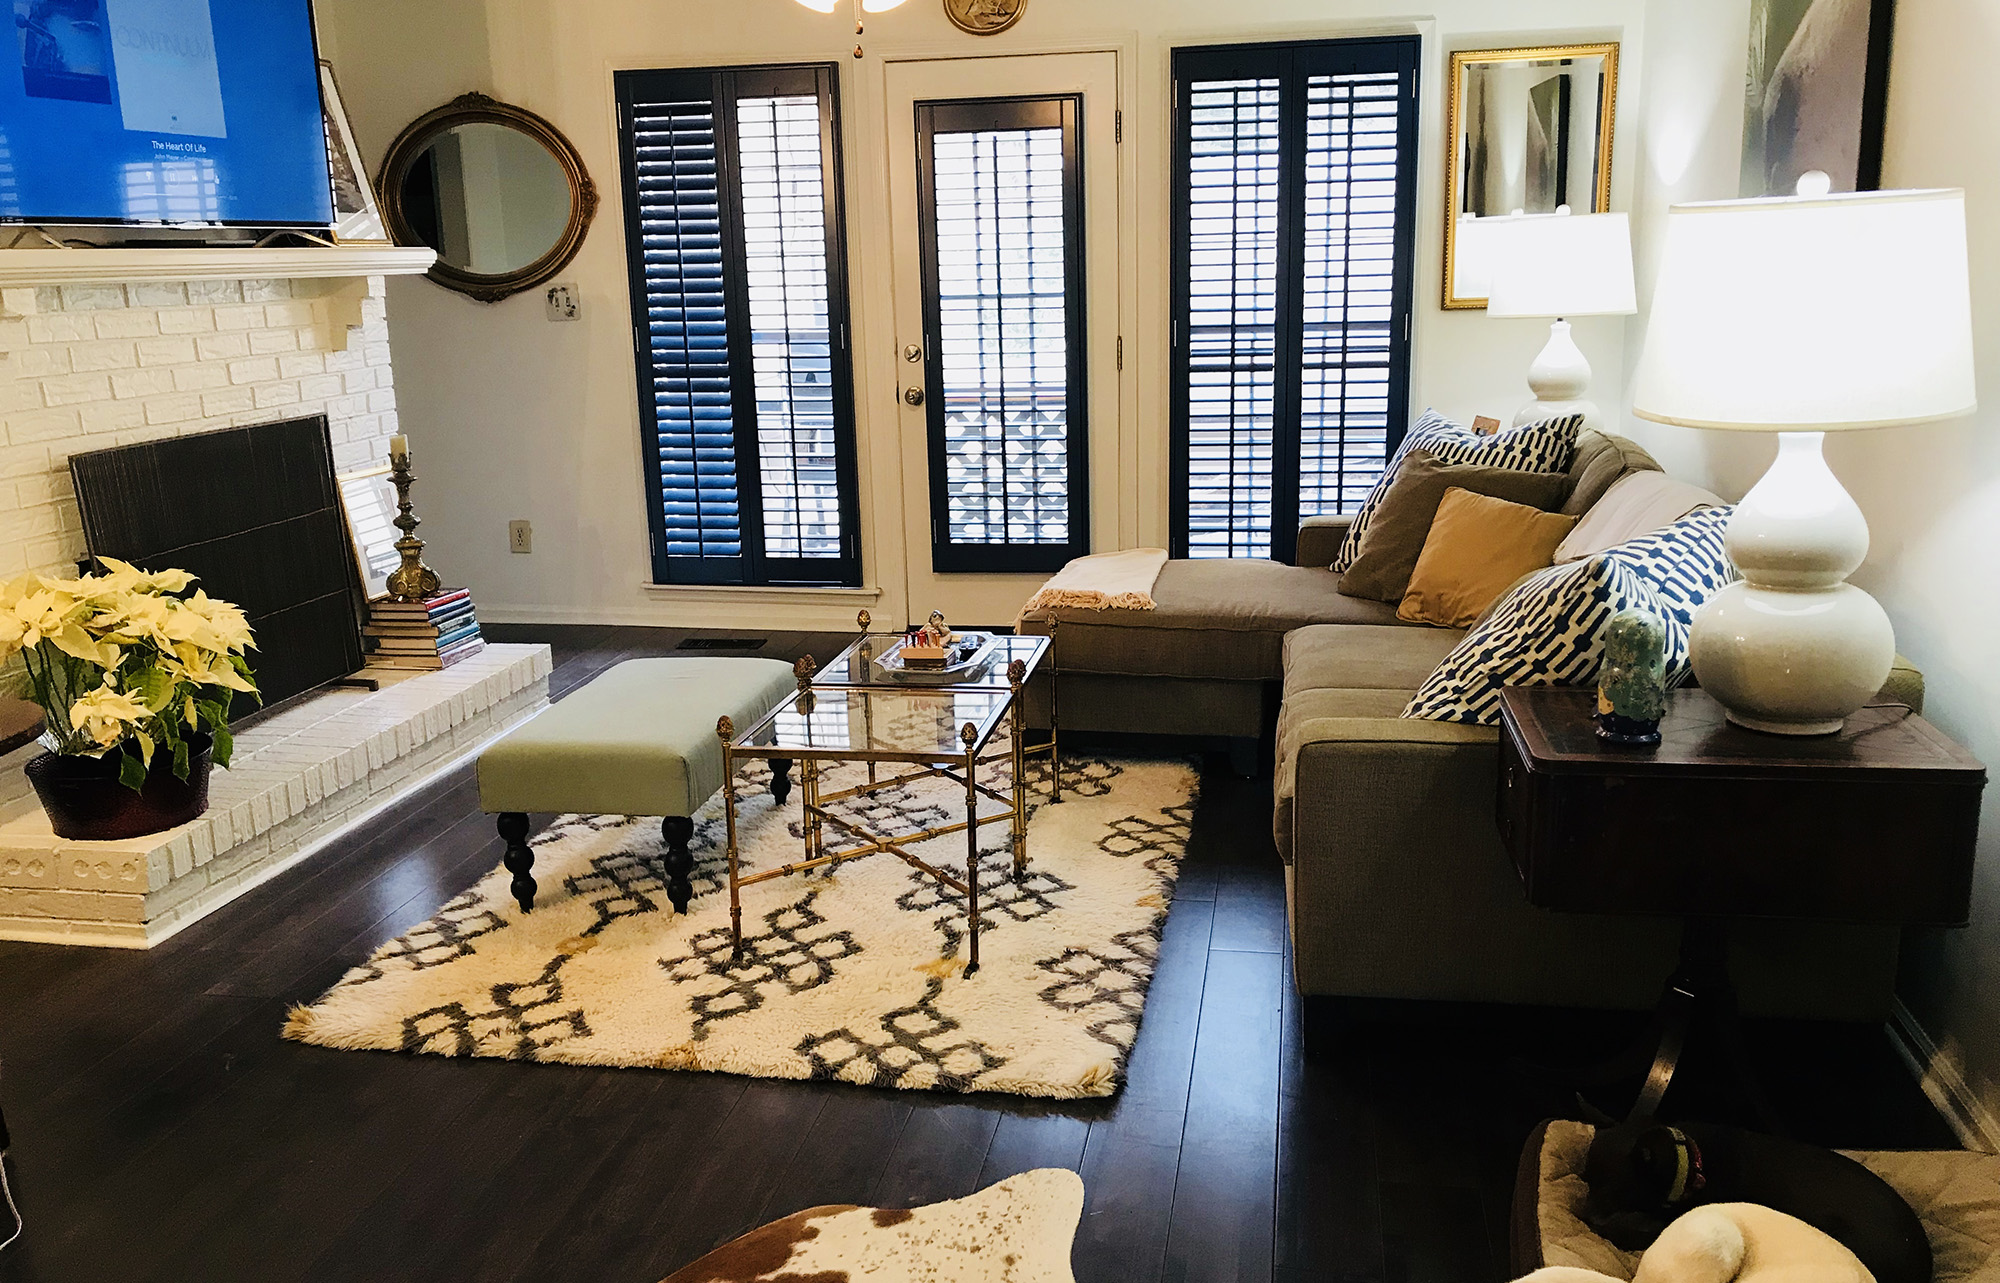 Plantation Shutters: More Than Just Good Looking